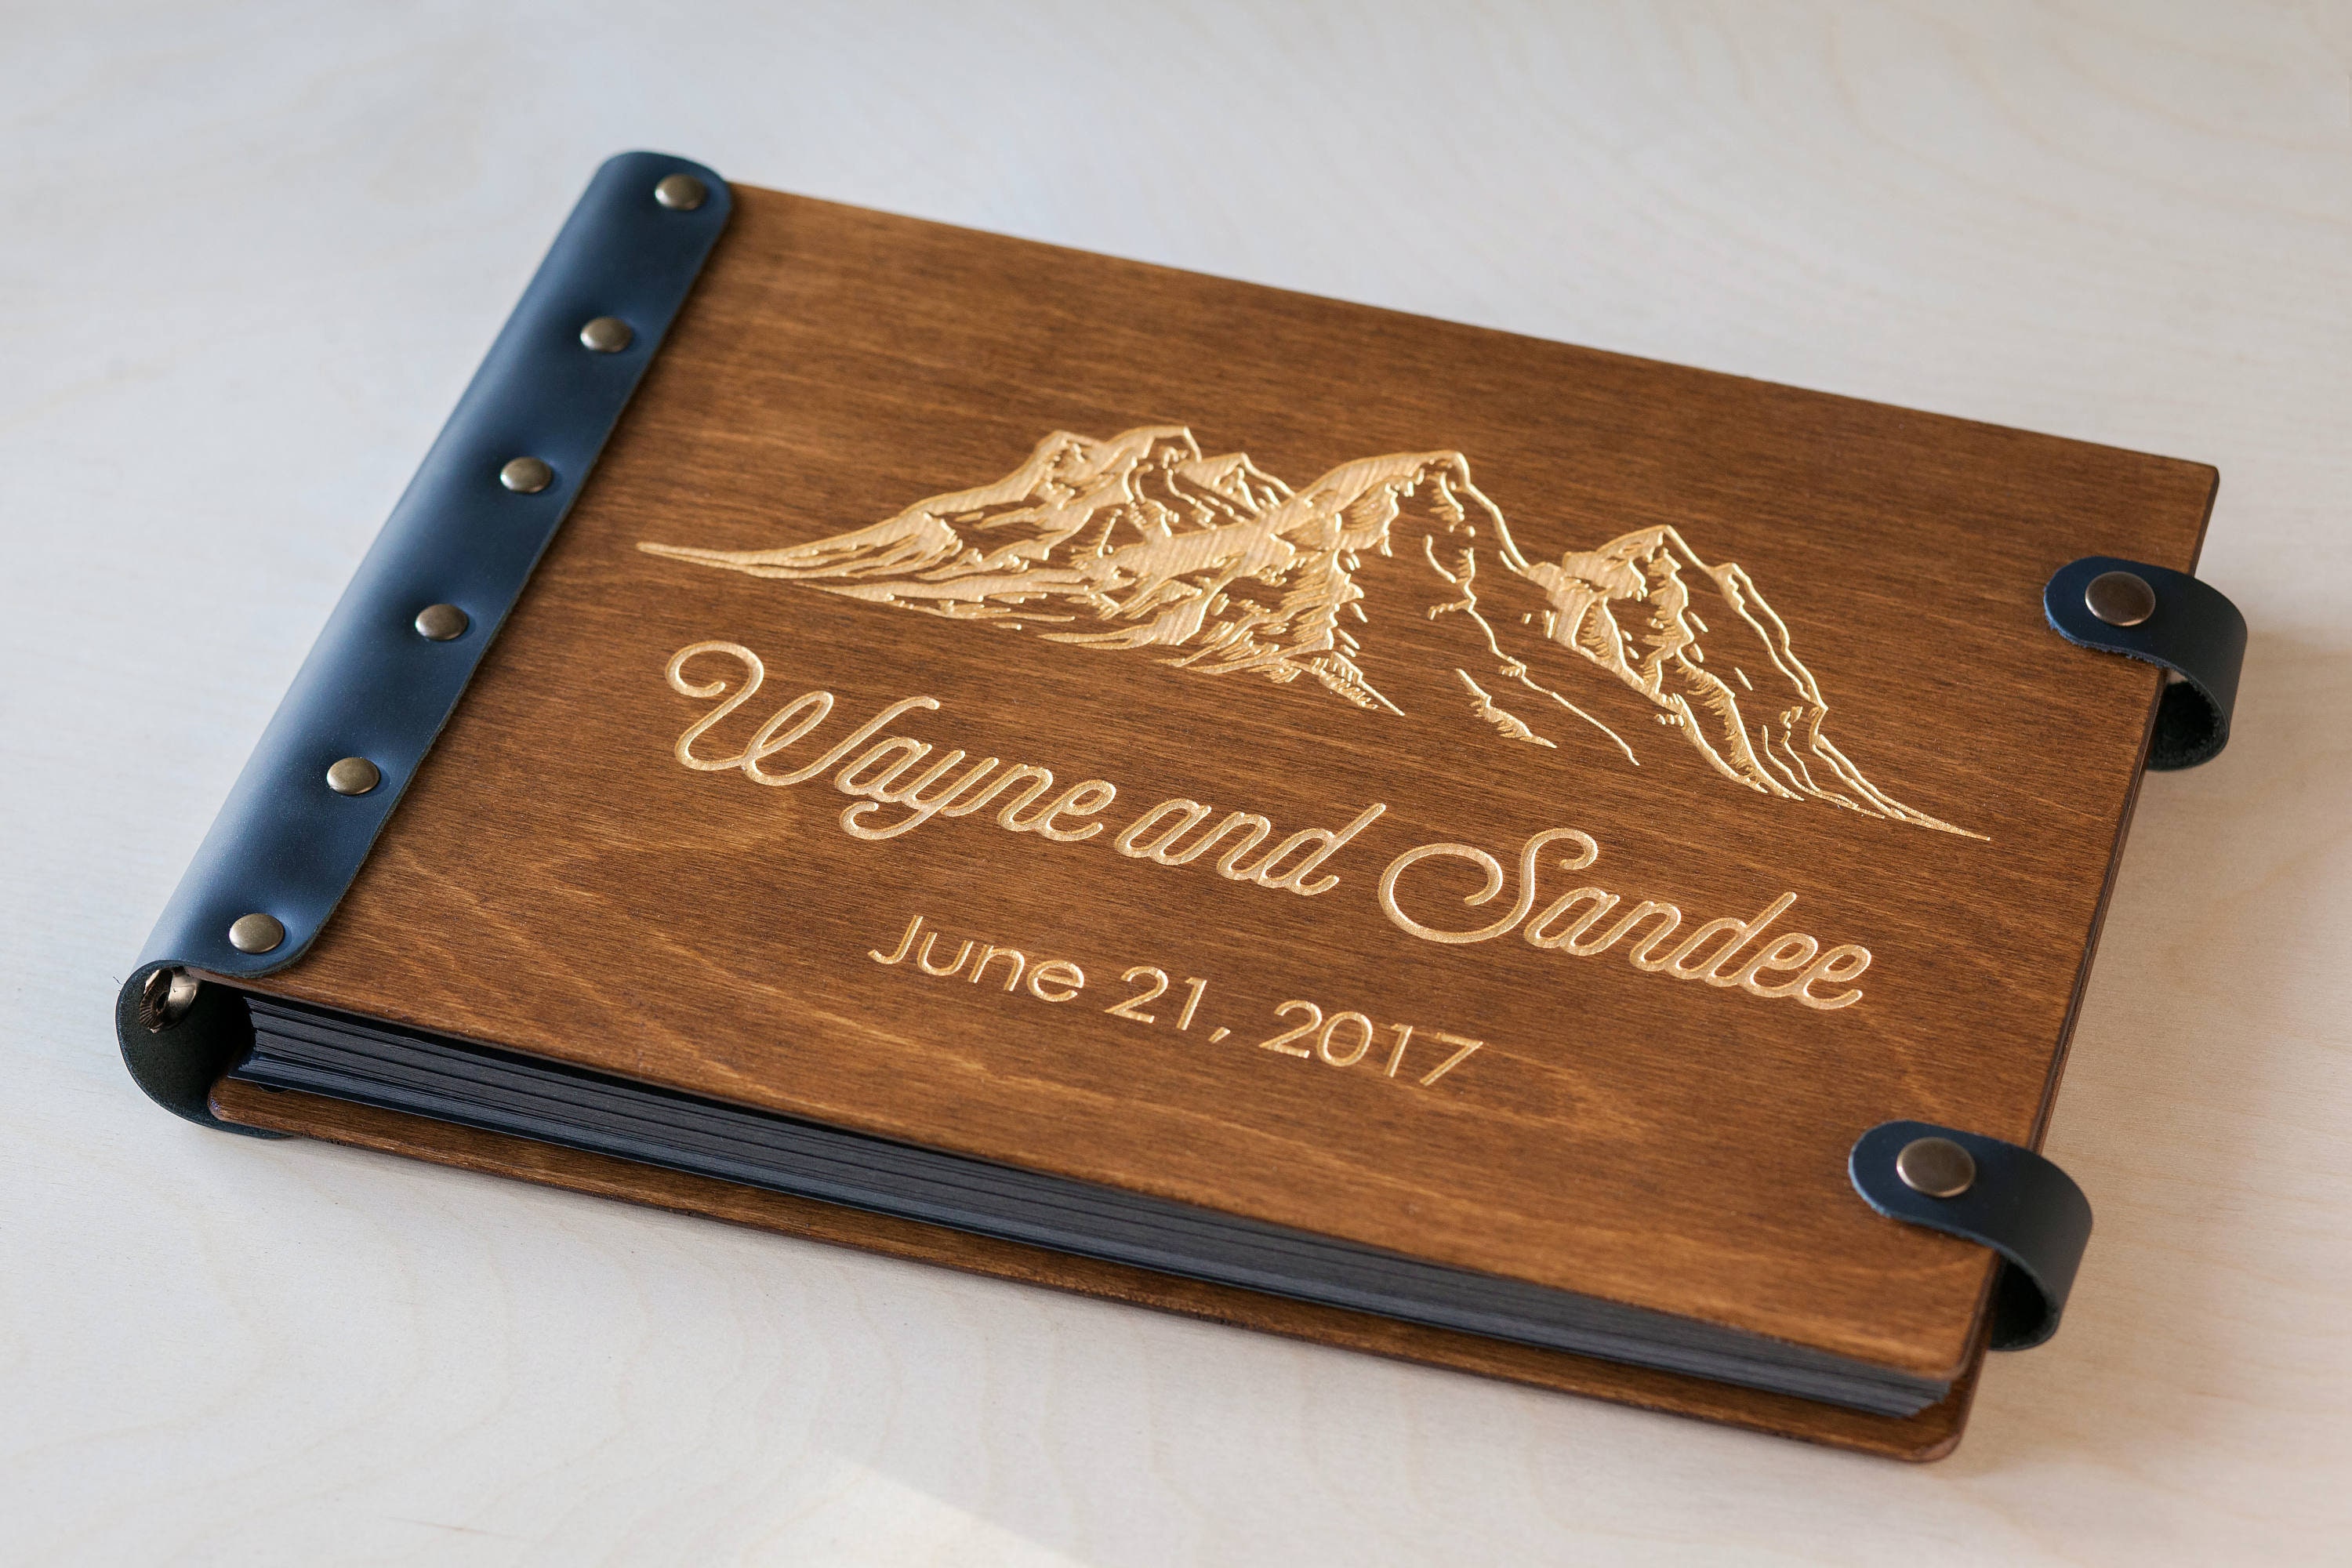 Wooden Photo Album With Mountains Design, Personalized Photo Album for  Travel Memories, Unique Photo Book, Travel Gift 